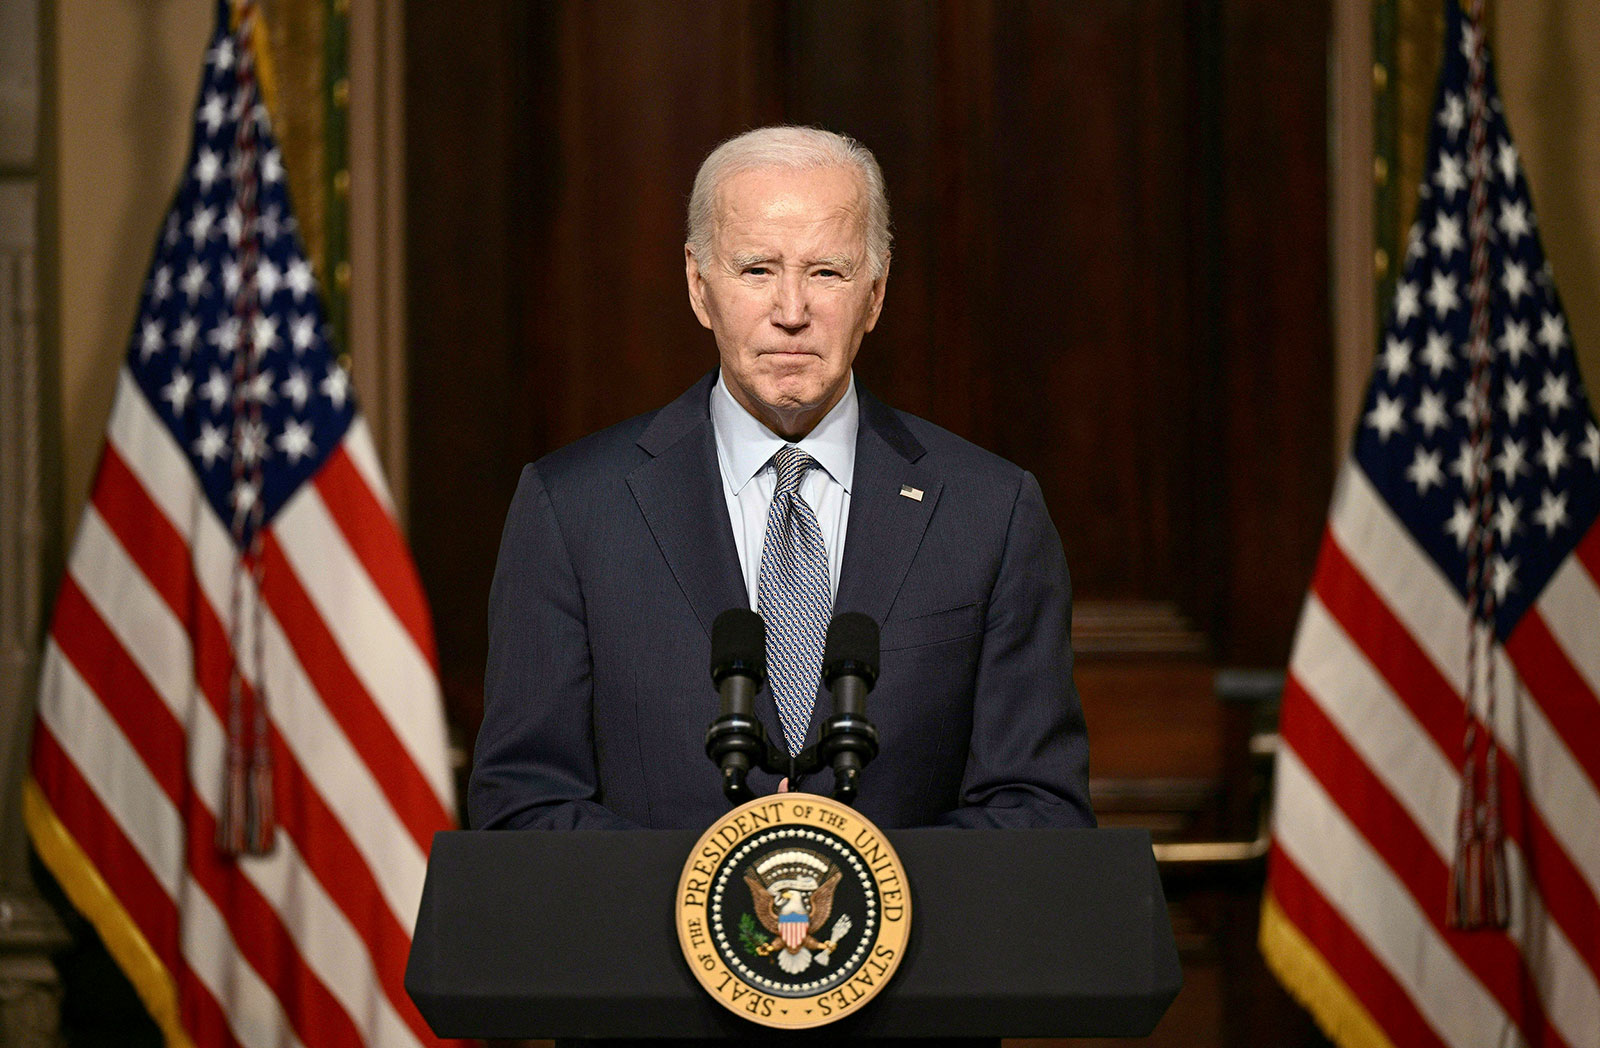 Biden speaks at a roundtable with Jewish community leaders in the Indian Treaty Room of the White House on October 11, 2023. (Photo by Brendan SMIALOWSKI / AFP) (Photo by BRENDAN SMIALOWSKI/AFP via Getty Images)